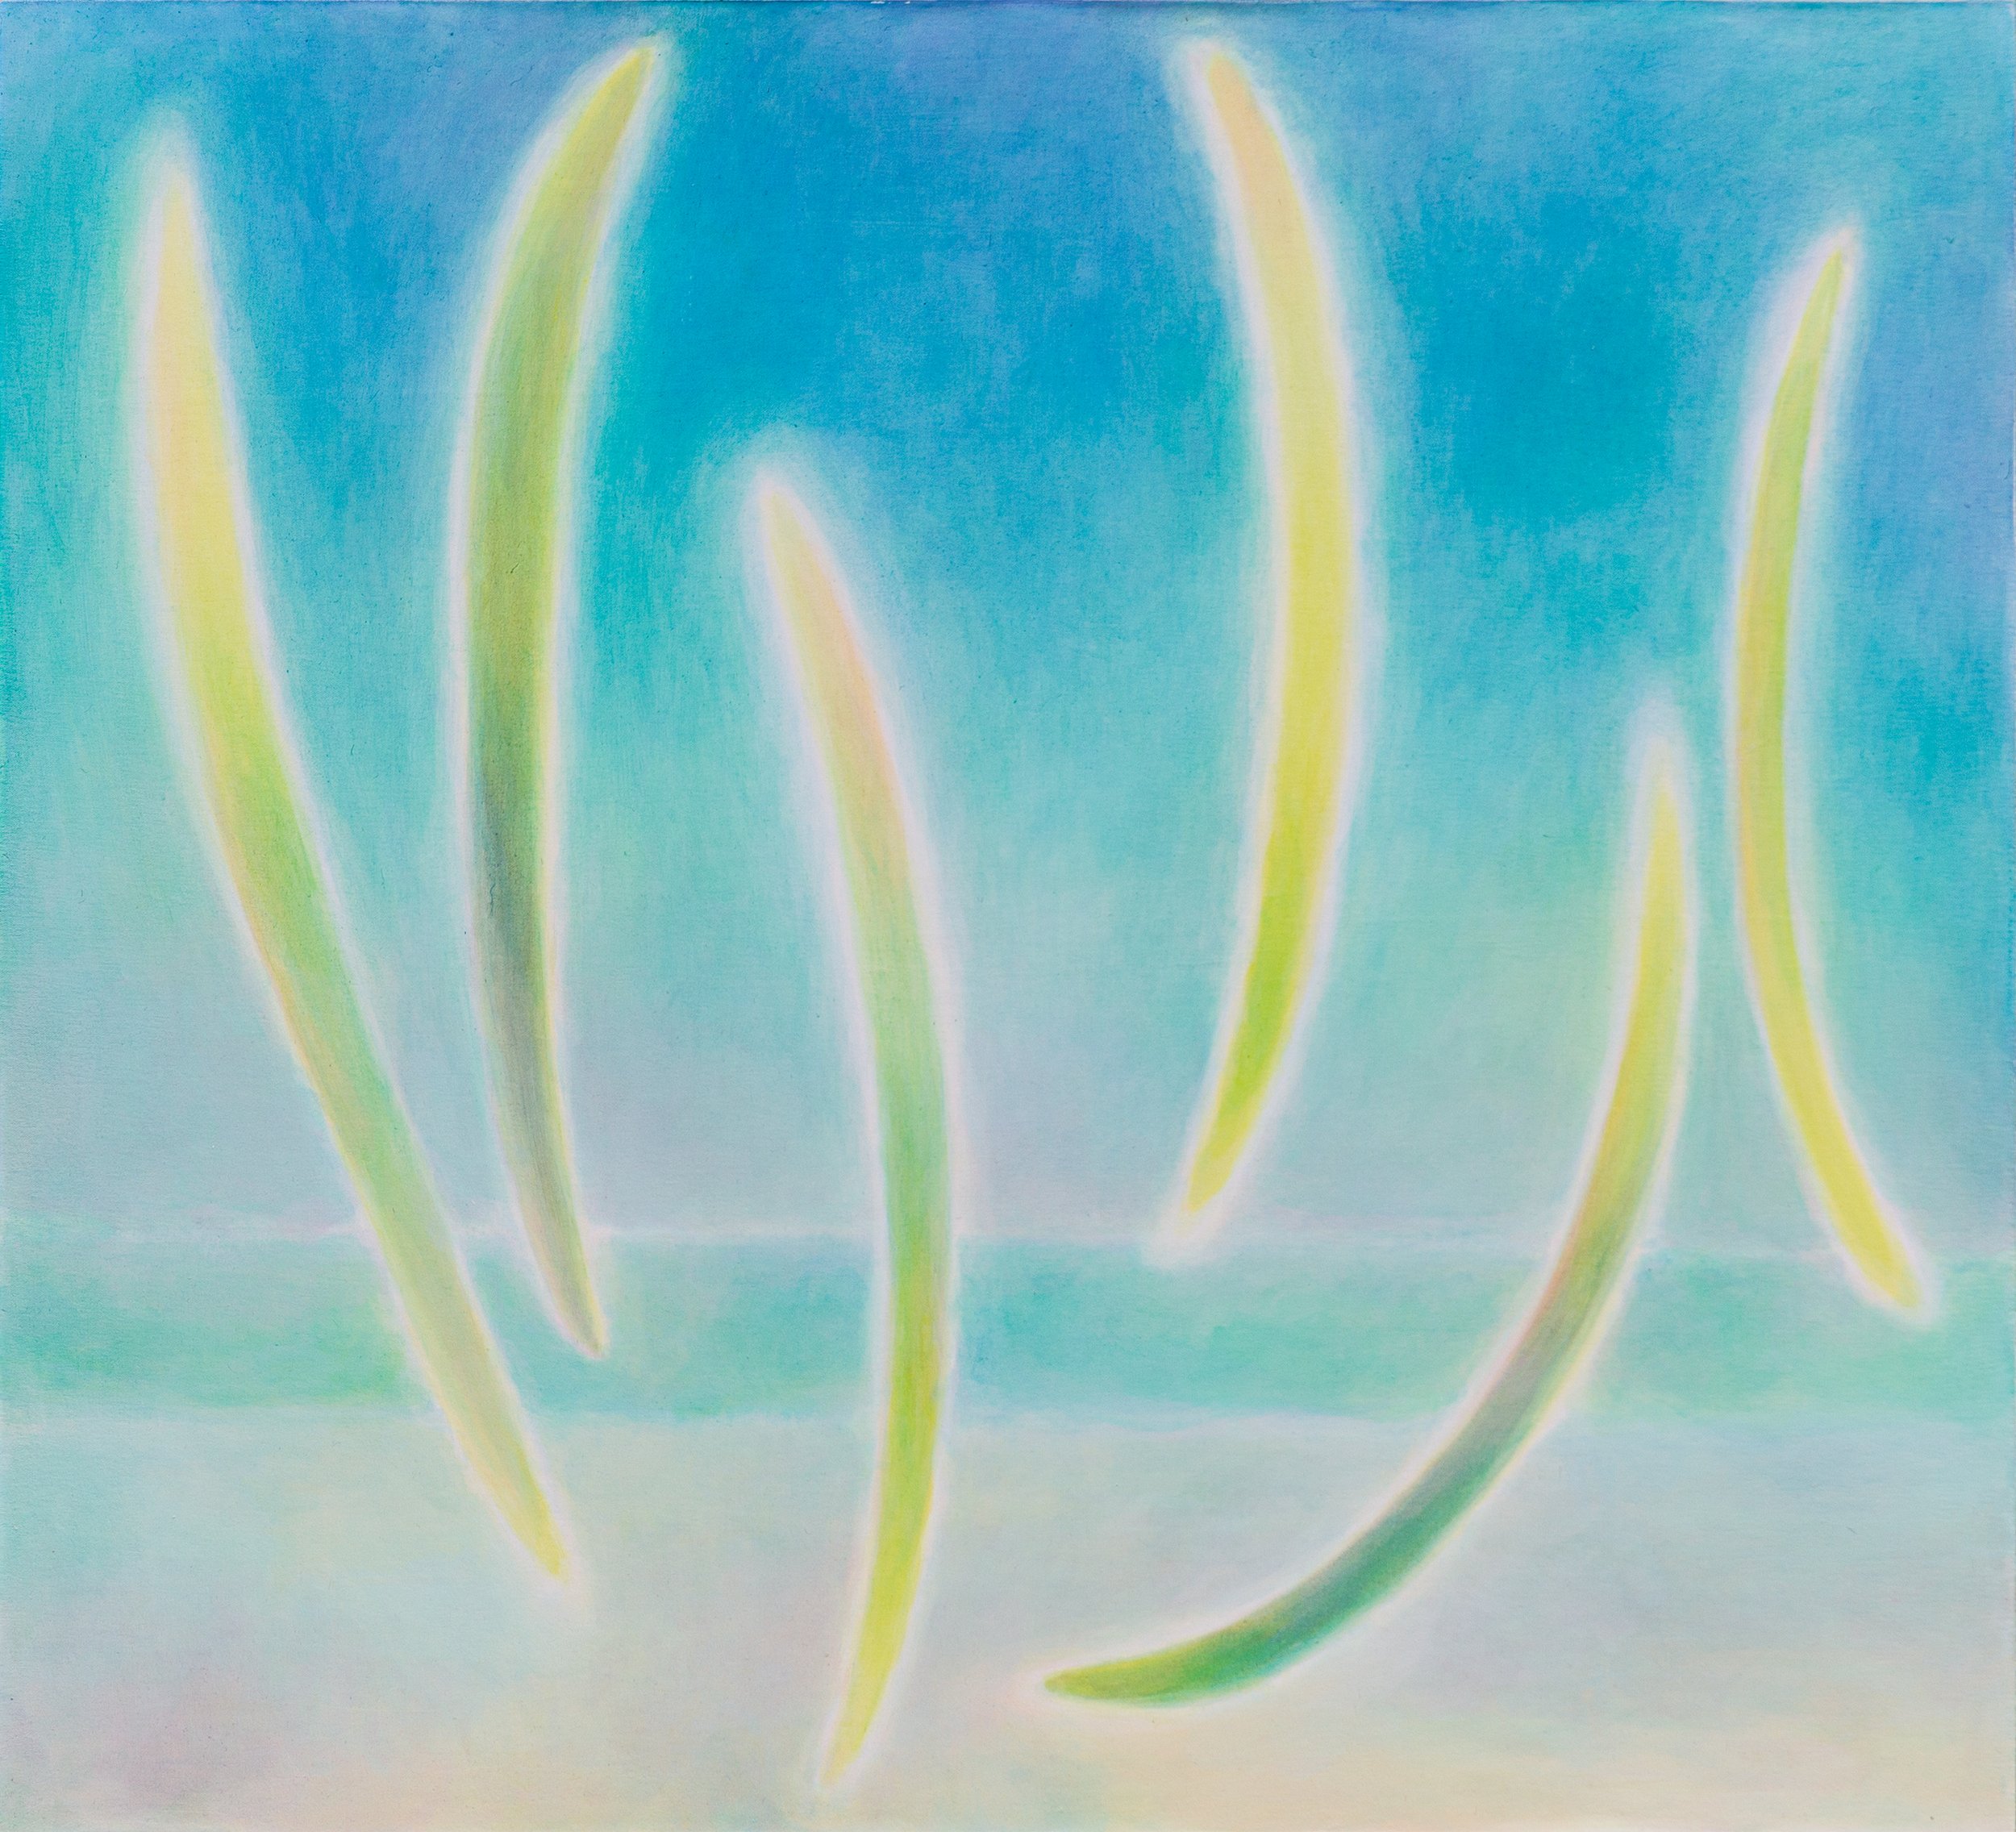  Shuling Guo,  Sotto Voce-Long Island, Bahamas,  2021. Oil on canvas, 40 x 44 inches ©Shuling Guo, courtesy of Fou Gallery 